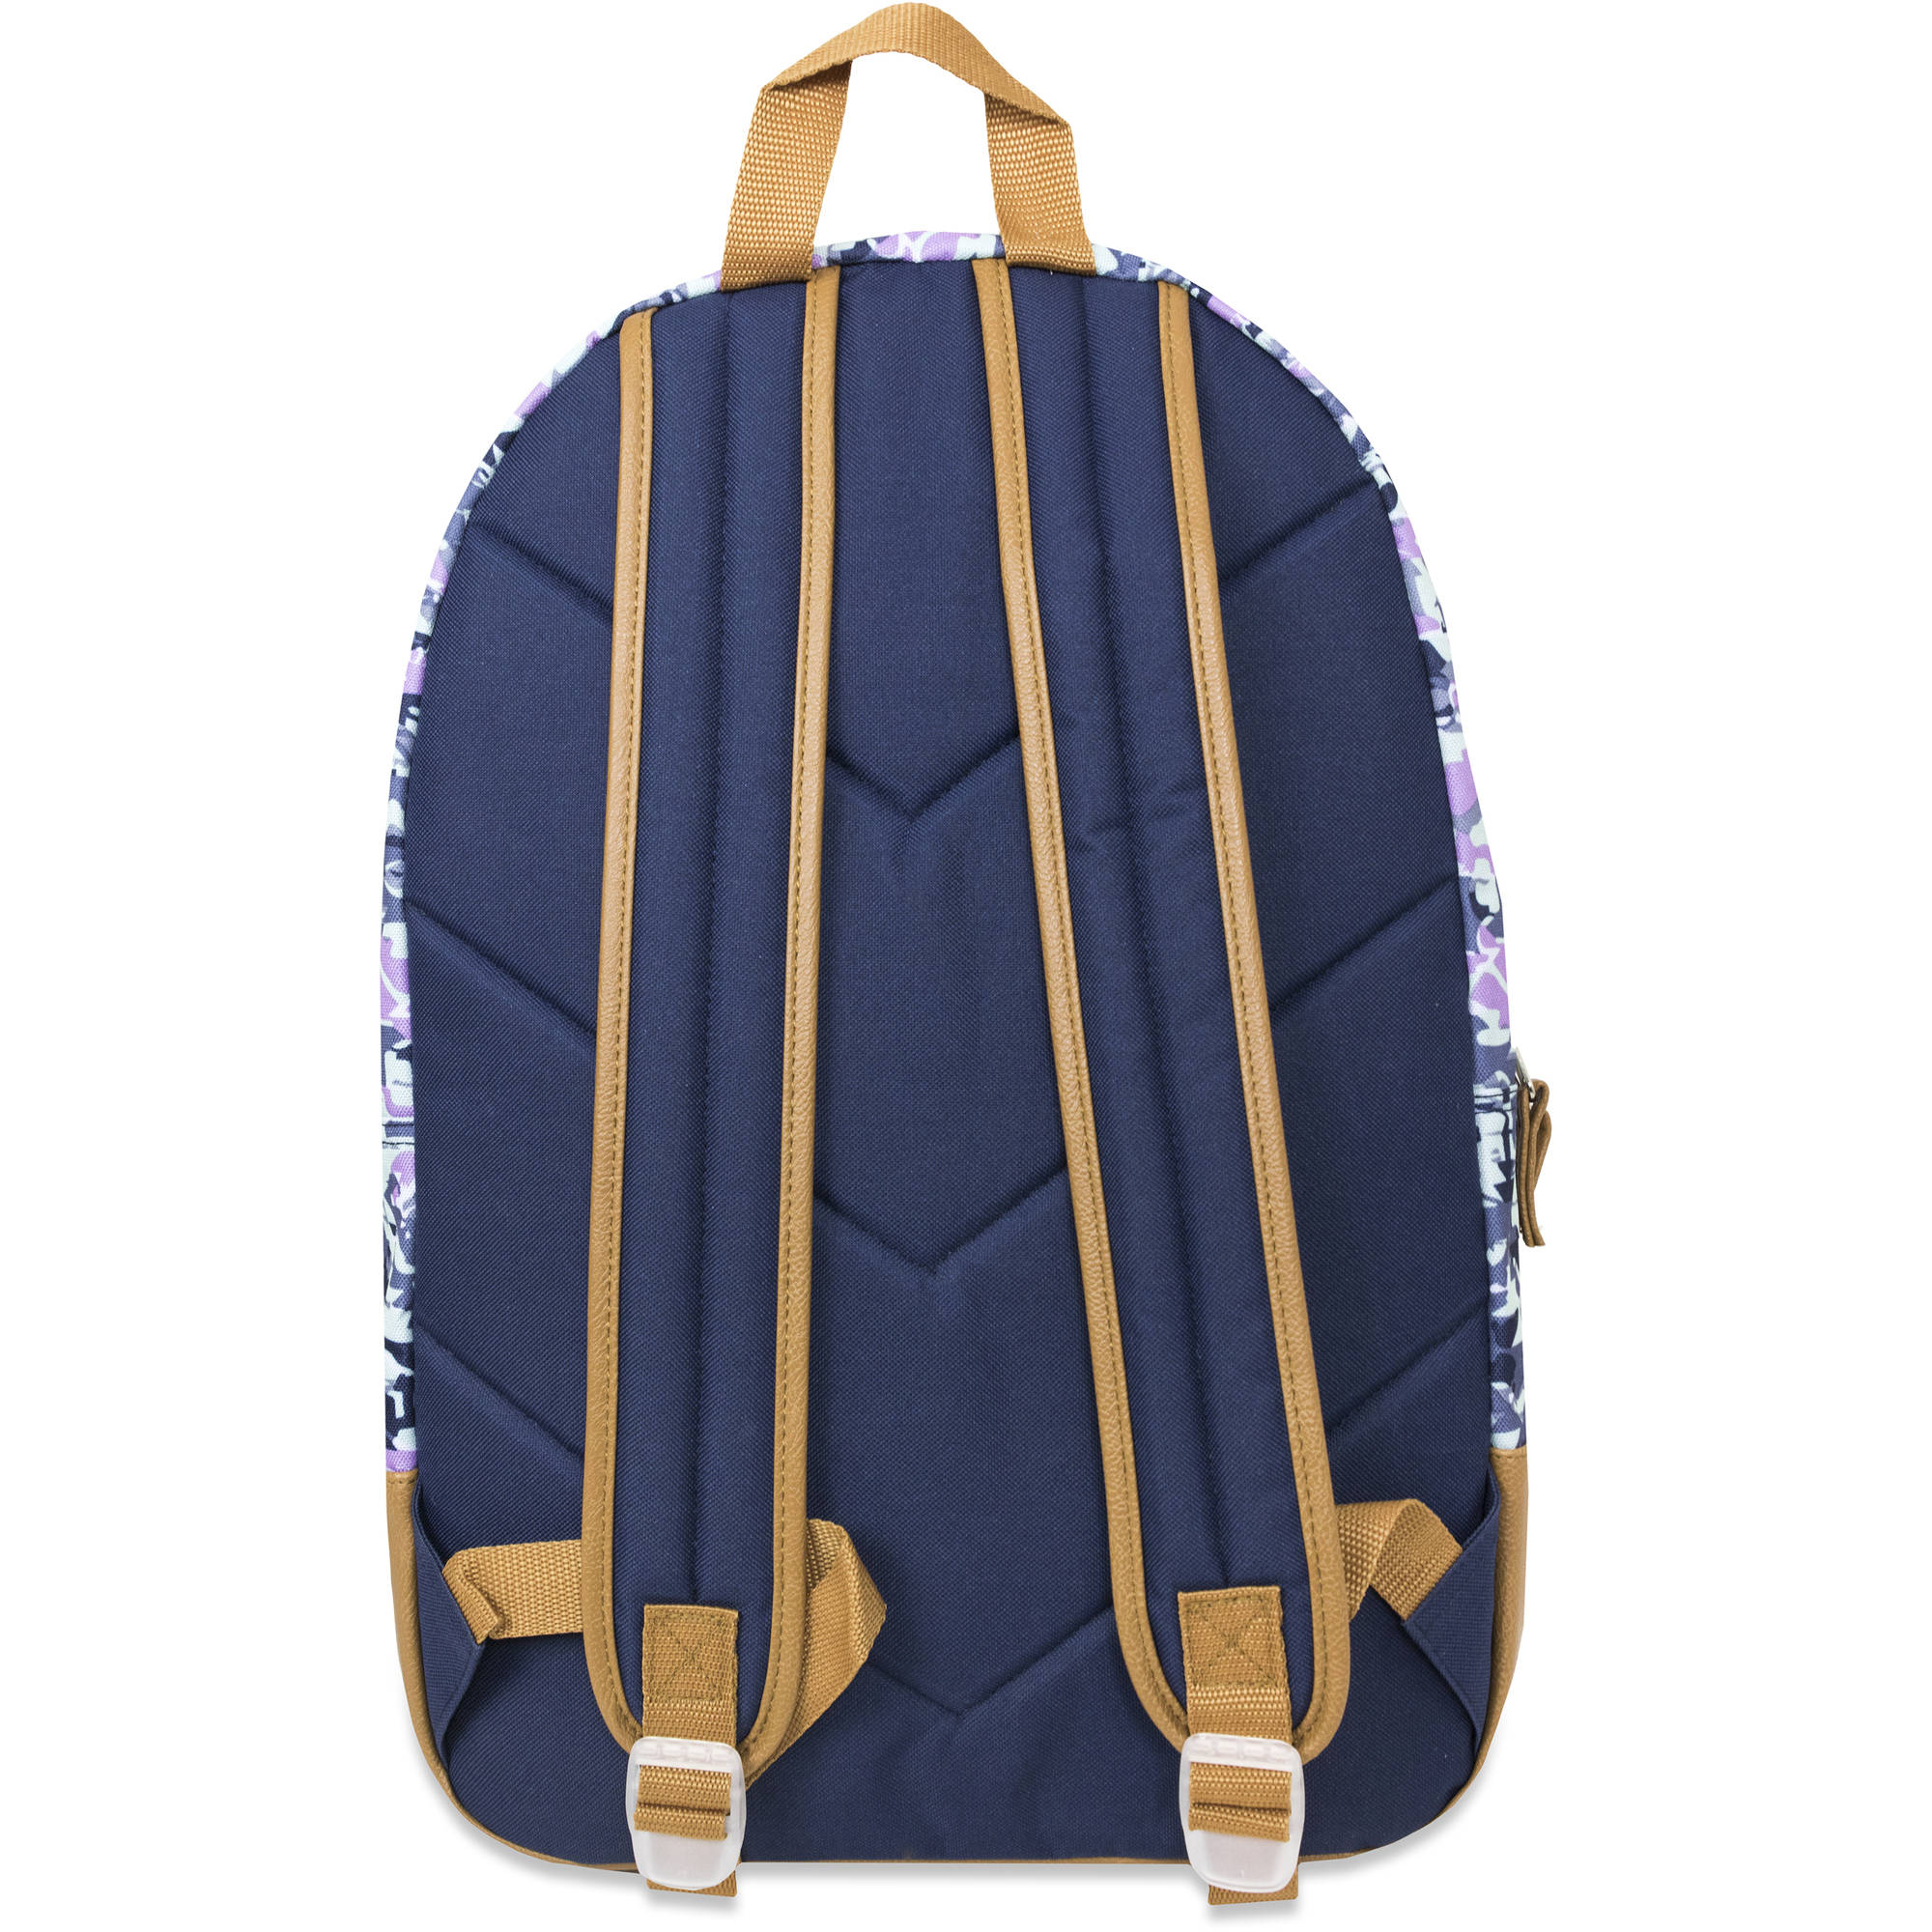 17.5 Inch Classic Backpack with Reinforced Vinyl Bottom and Comfort Padding - image 2 of 3